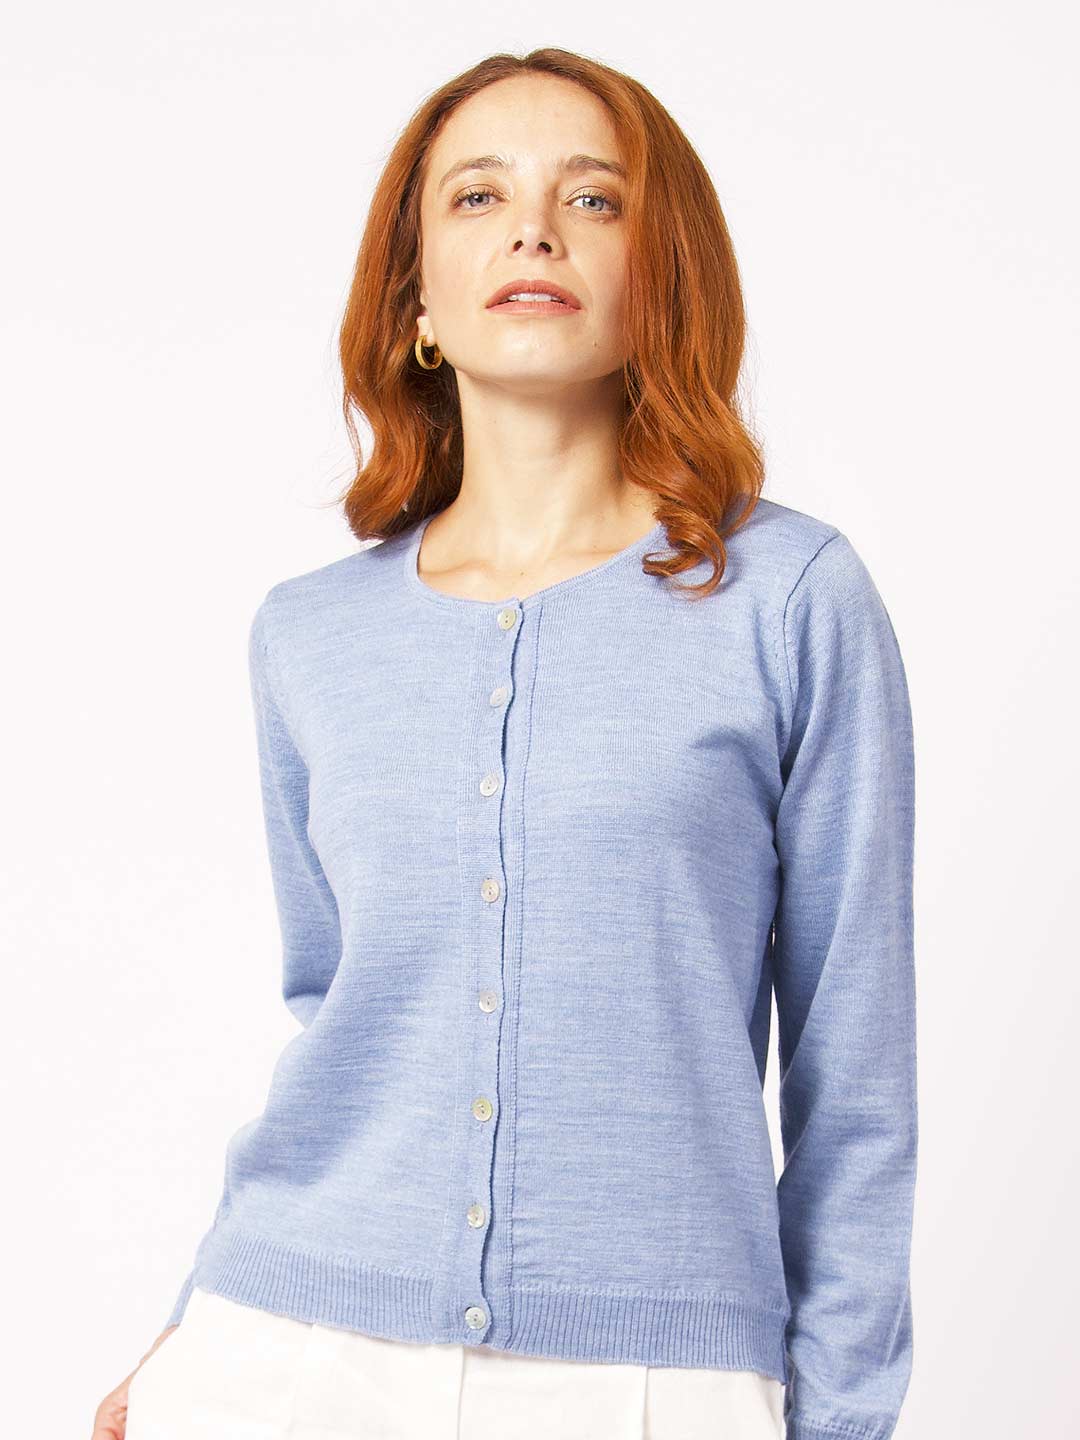 Cardigan with Round Neck in Merino Wool